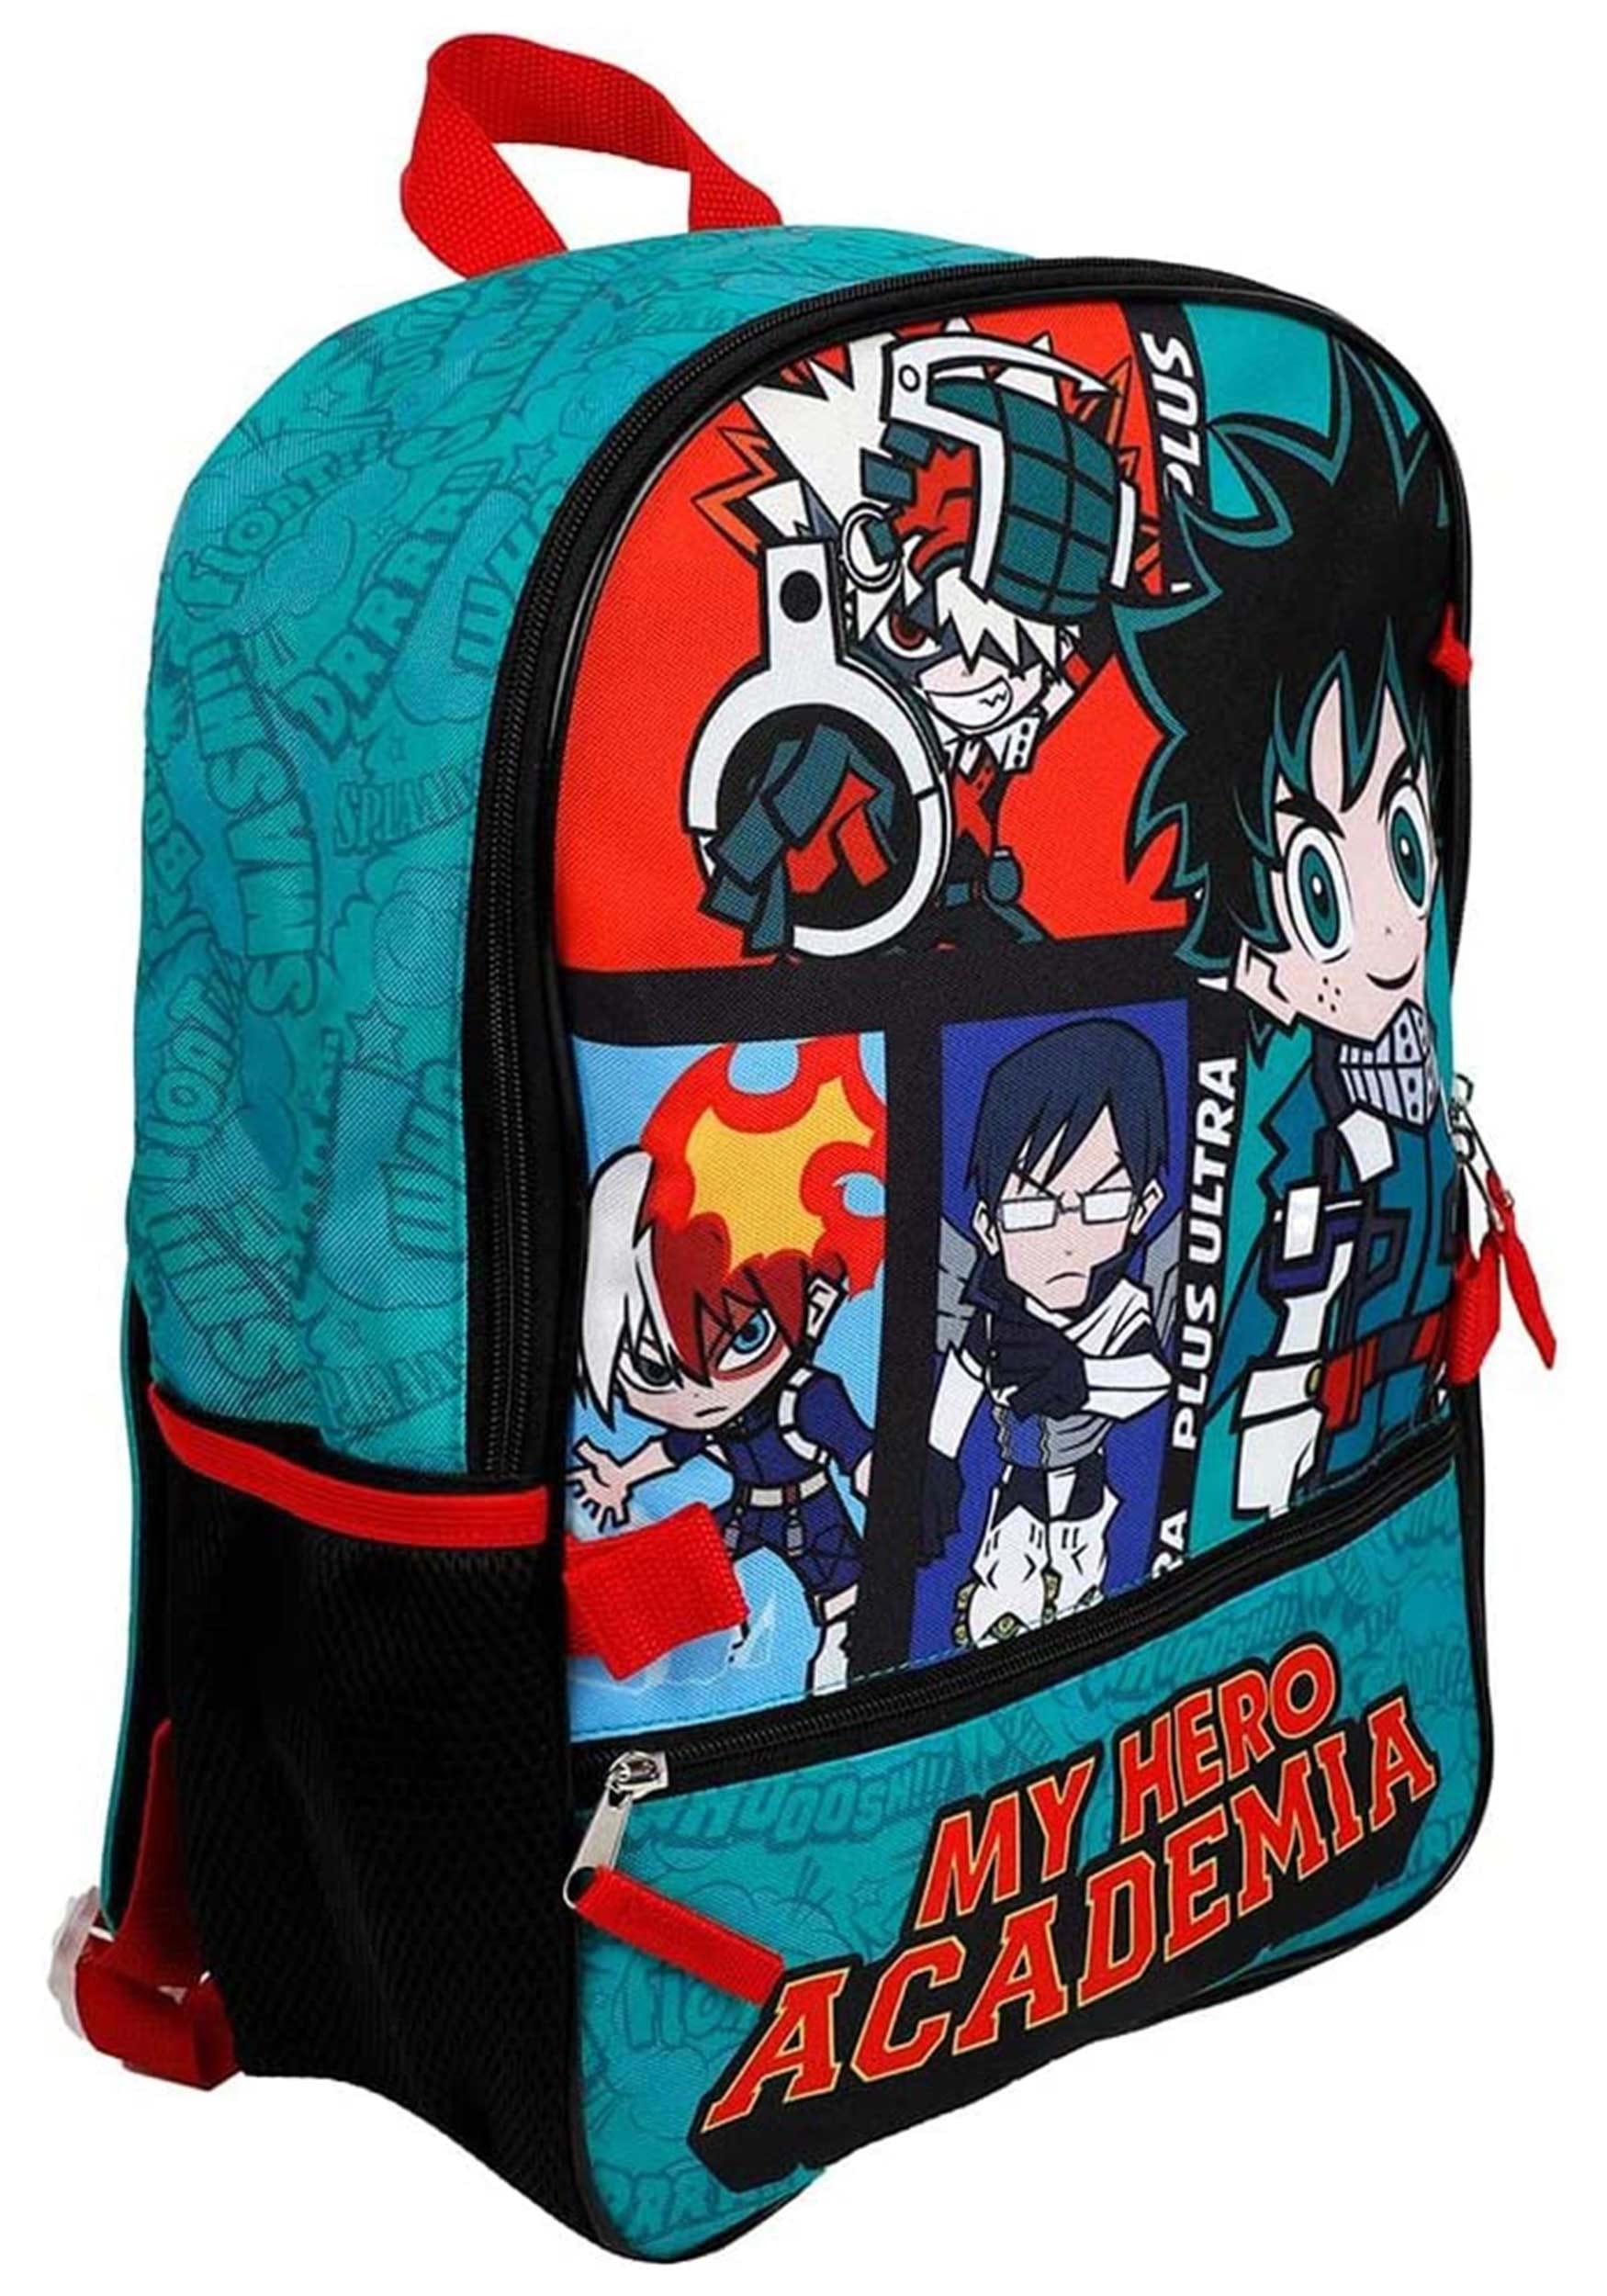 https://images.fun.com/products/89518/2-1-265847/my-hero-academia-backpack-5pc-set-w-lunchkit-rub-alt-2-1.jpg